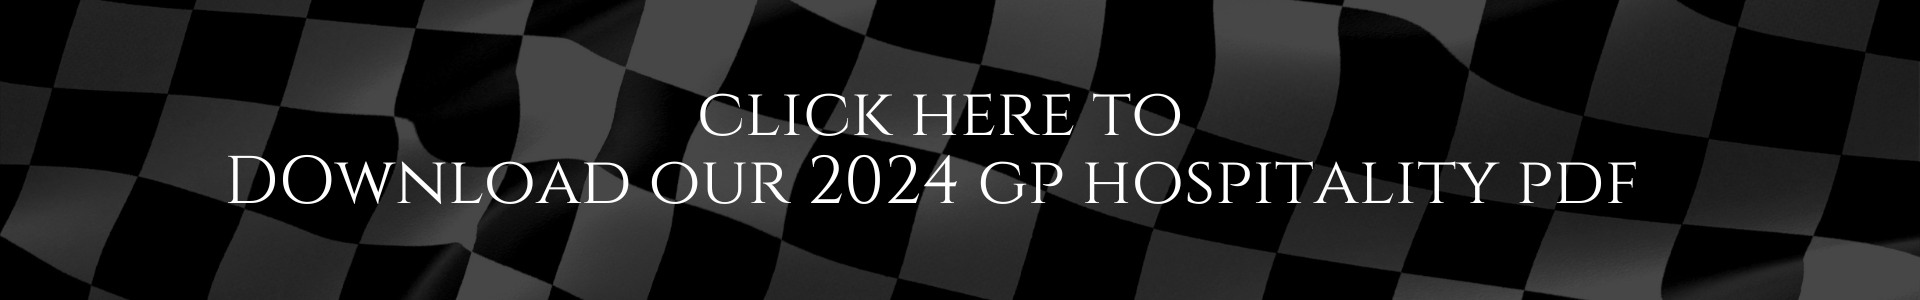 Click here to download our 2024 gp hospitality pdf